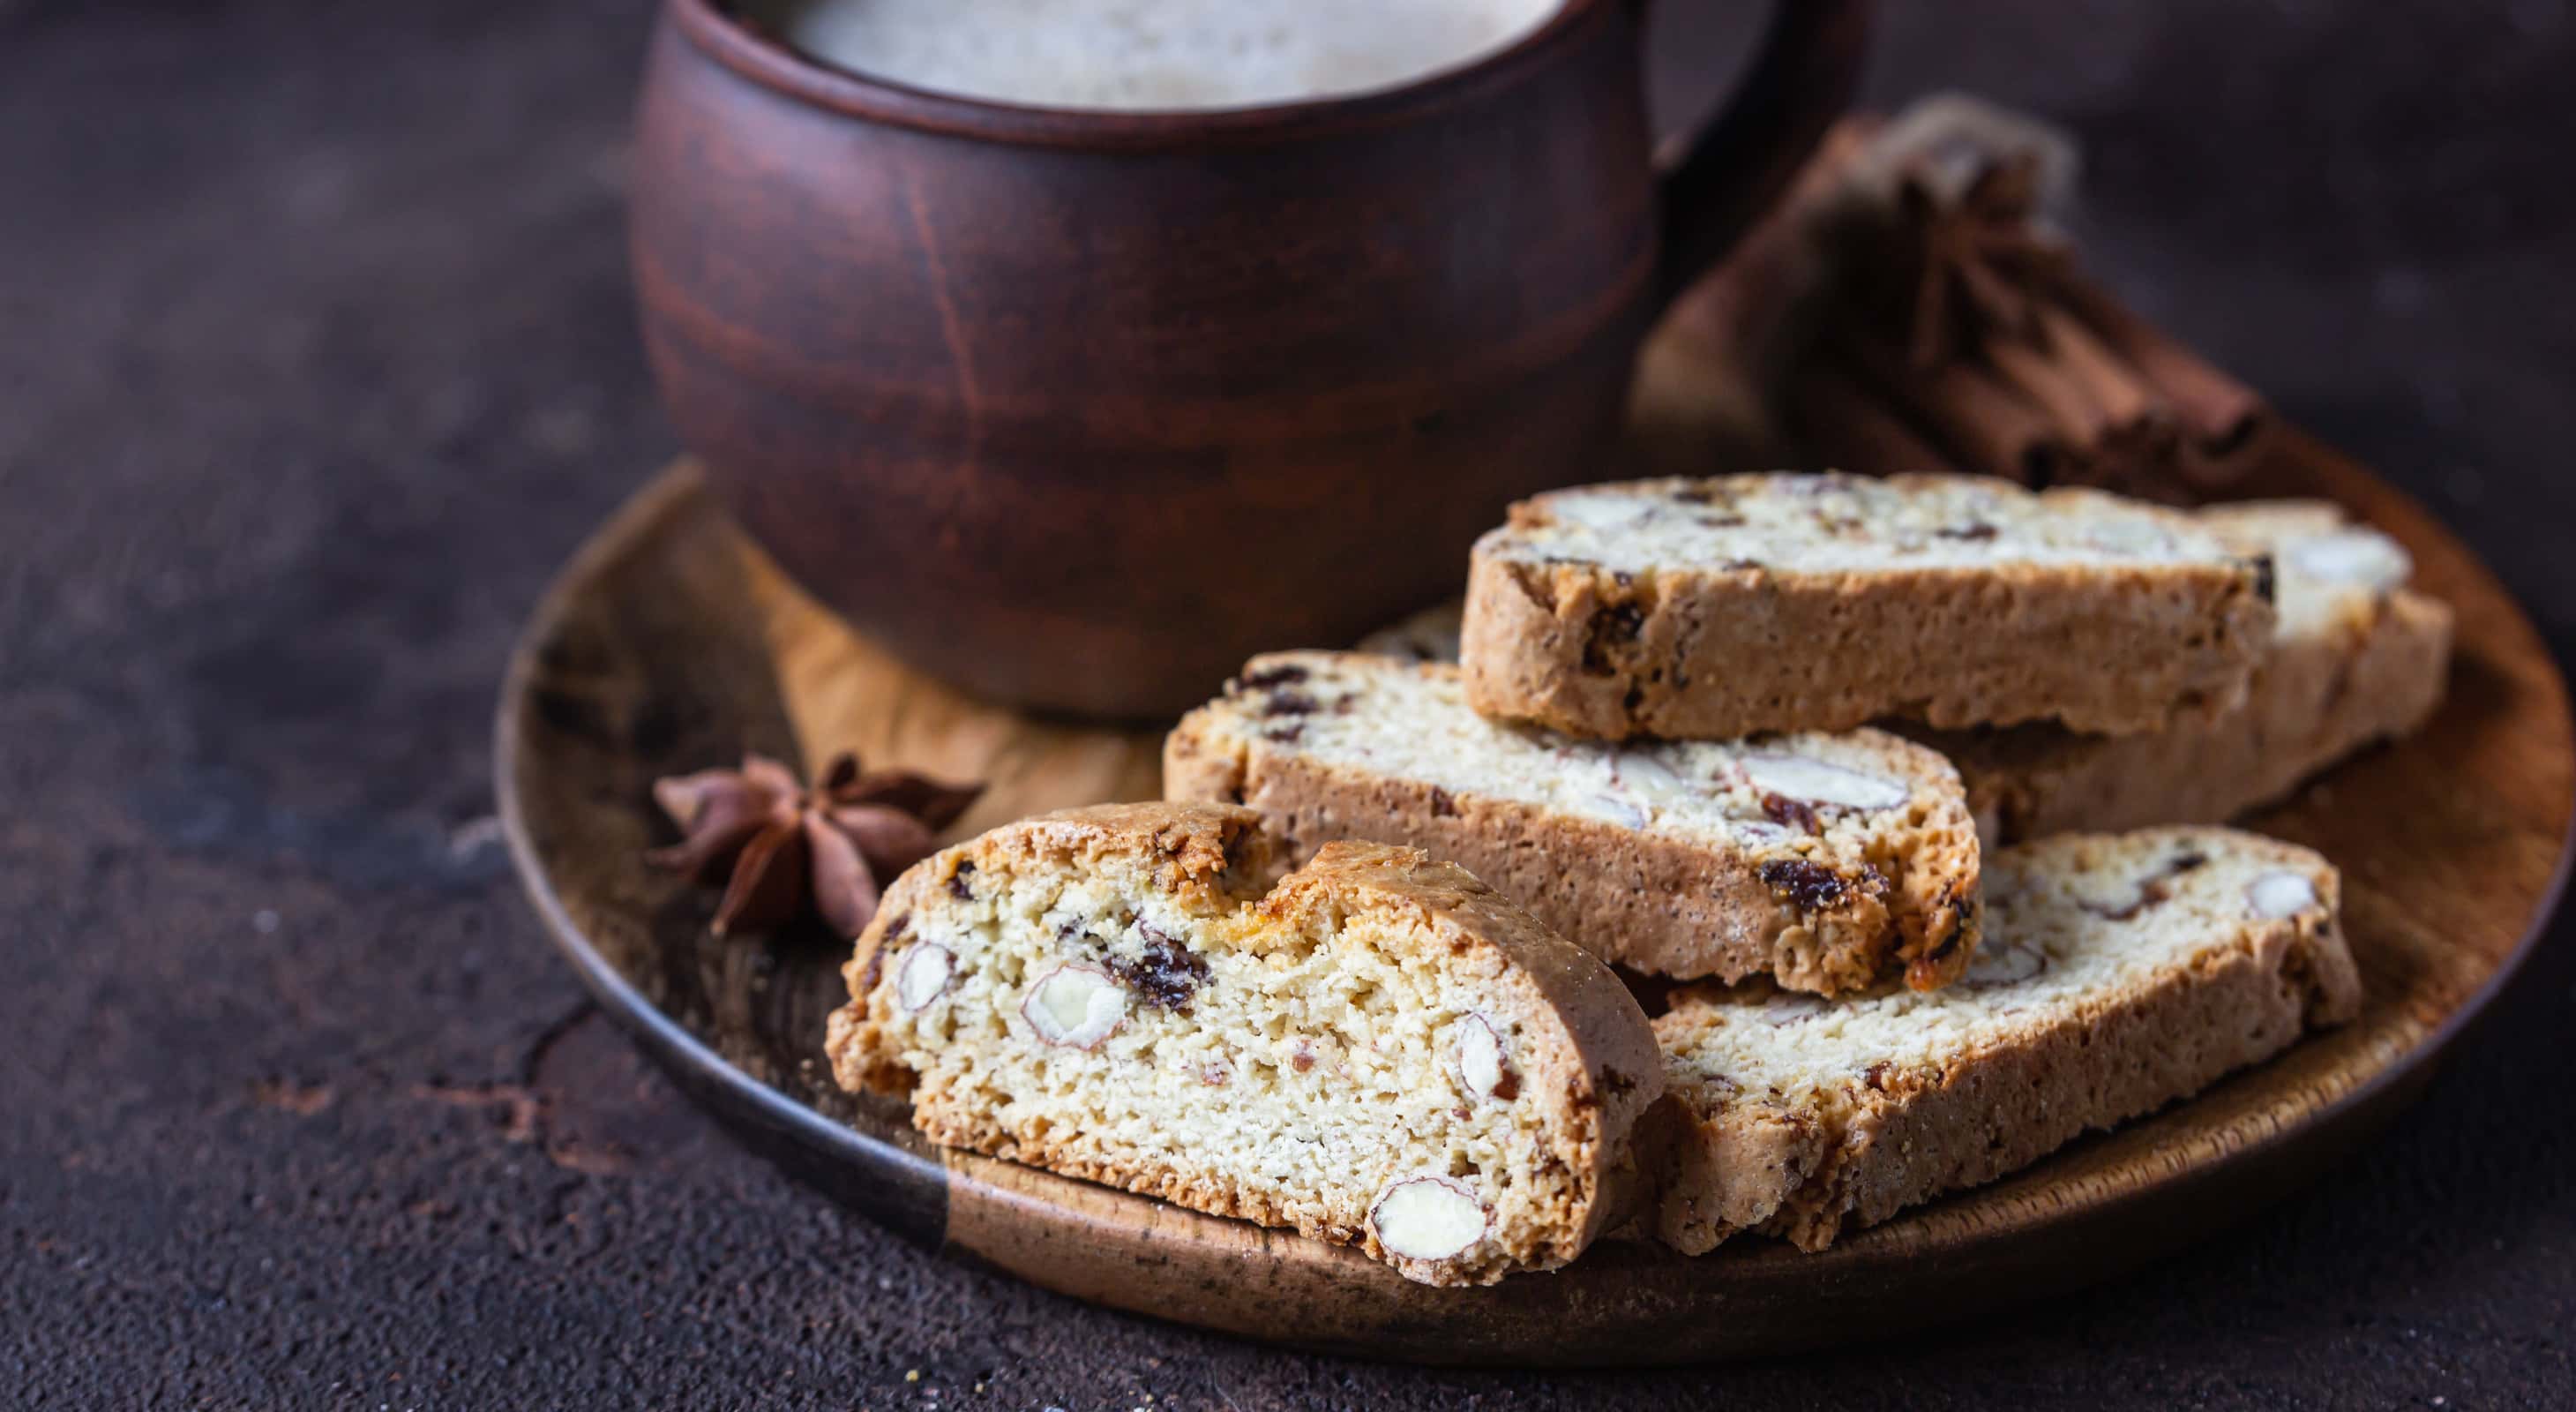 Almond biscotti on a wooden plate served with coffee